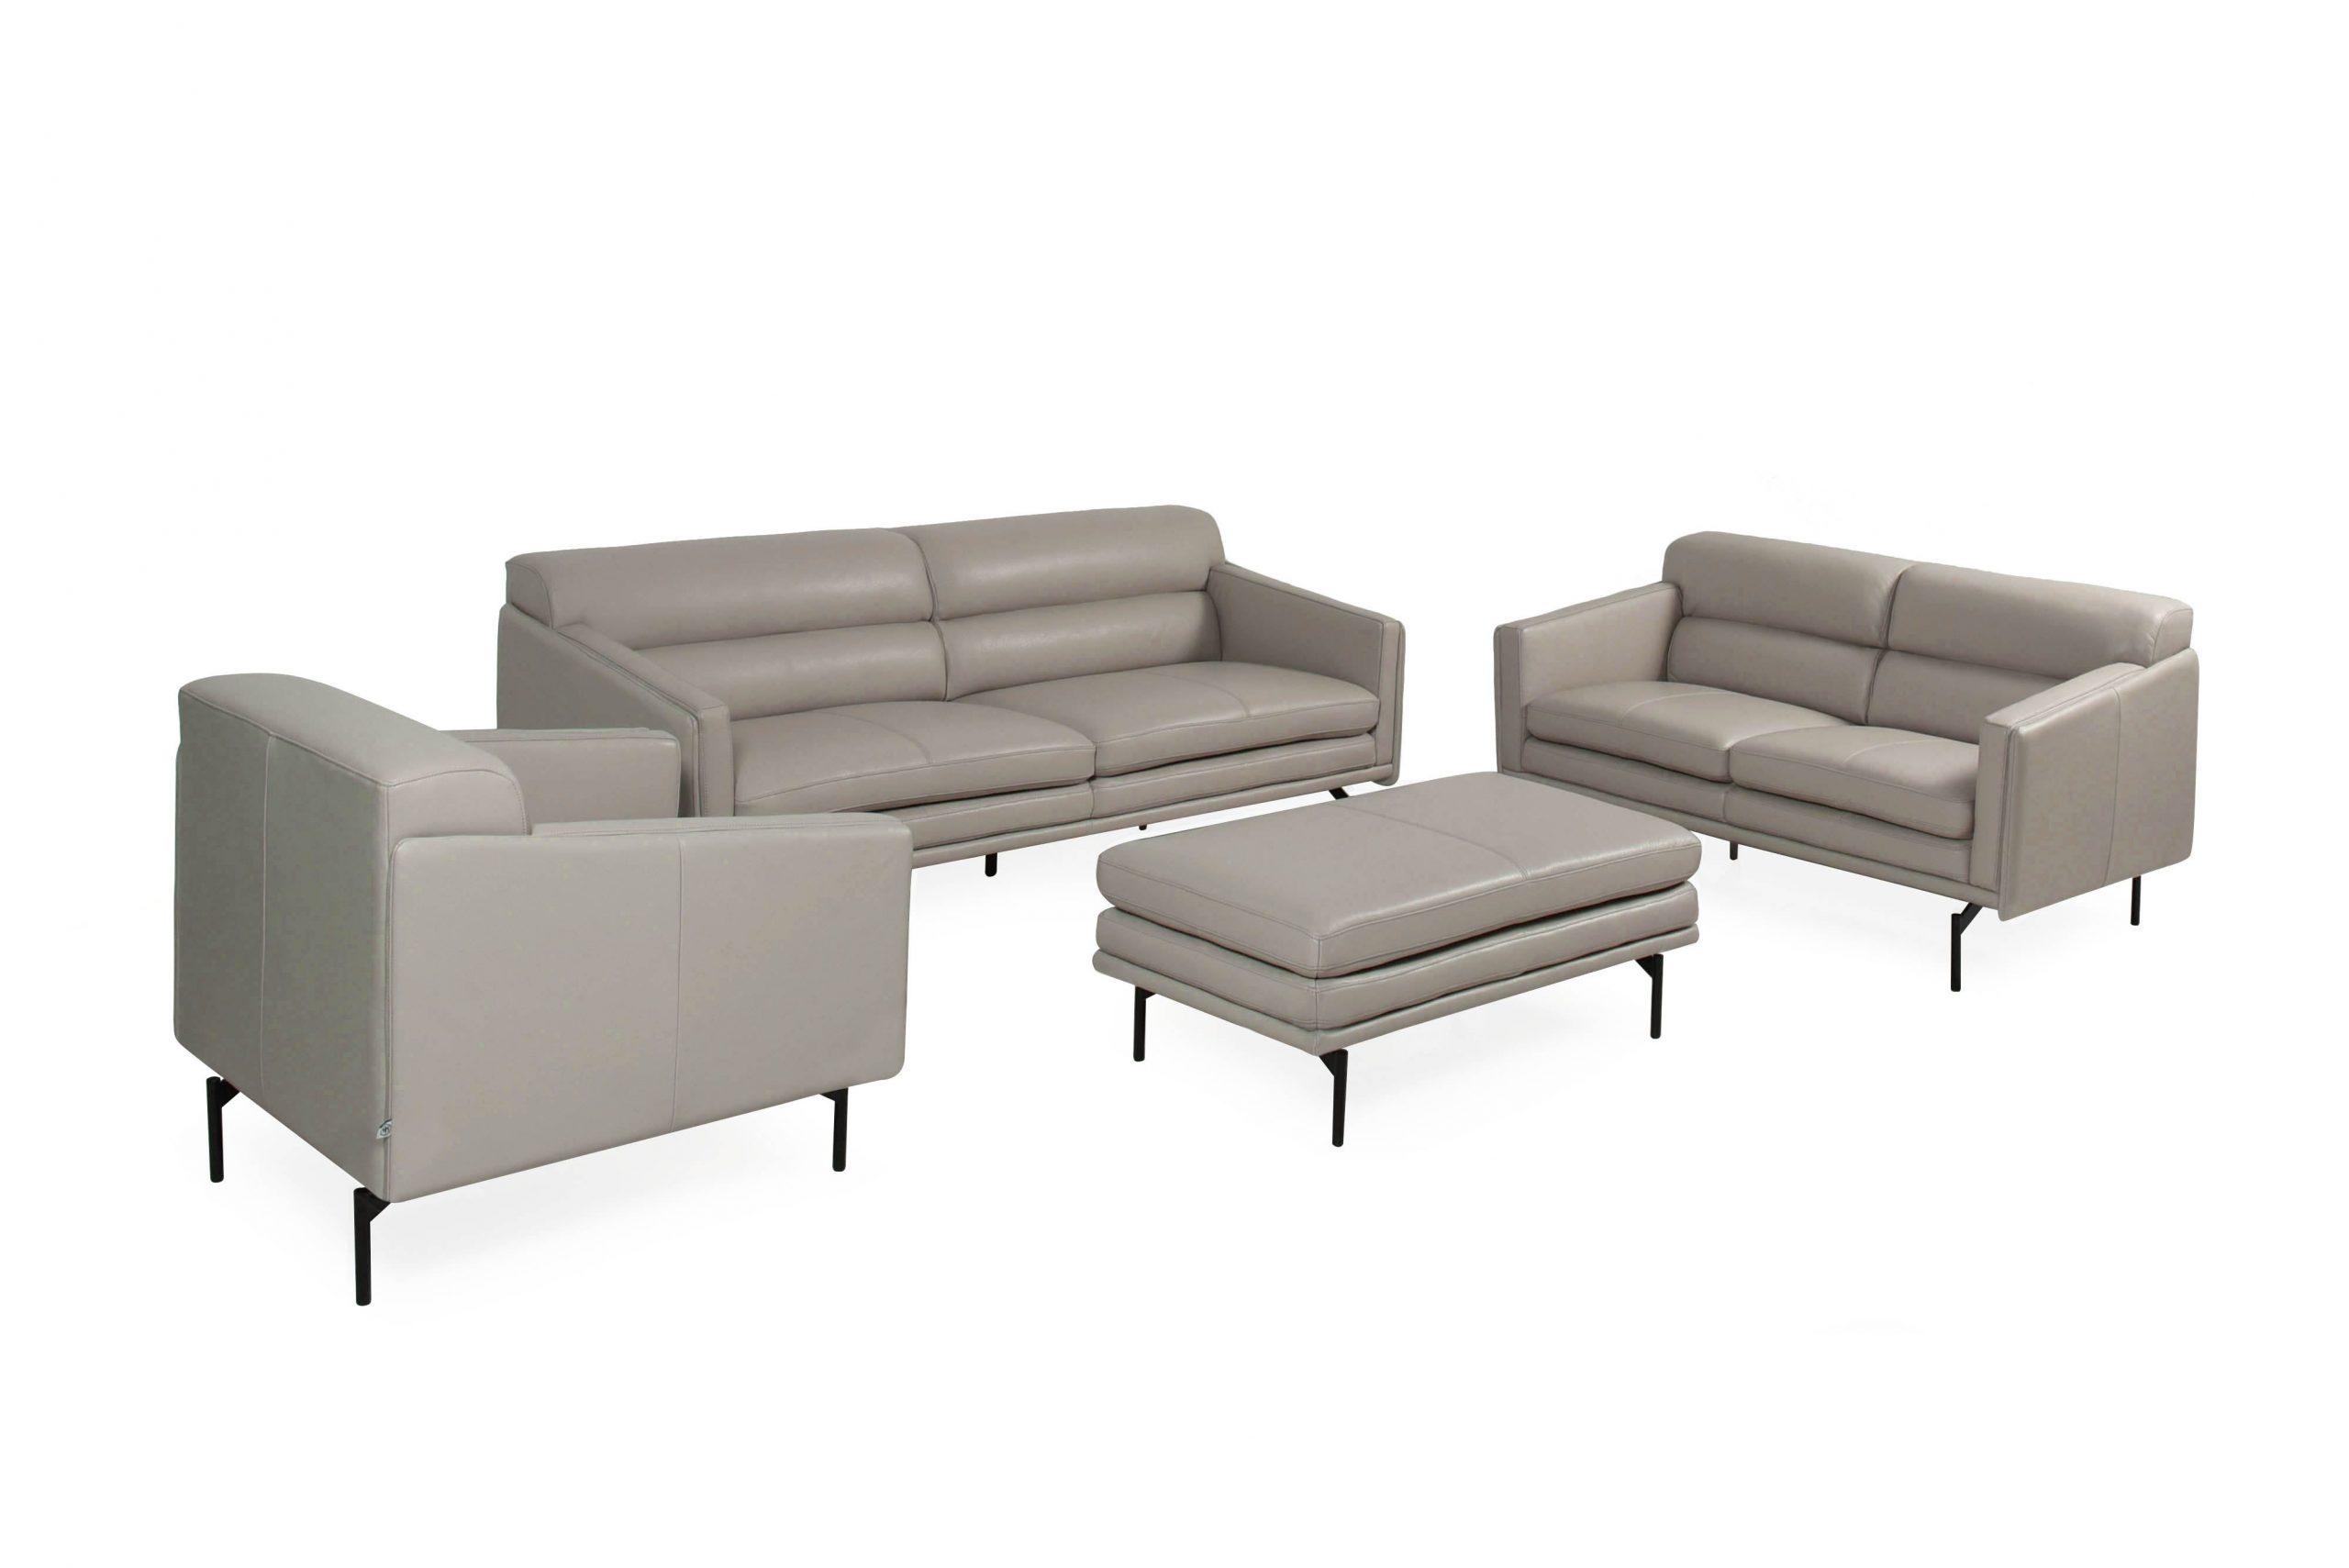 Contemporary, Modern Sofa Set 442 McCoy 44203BS1383-Set-3 in Light Gray Full Leather